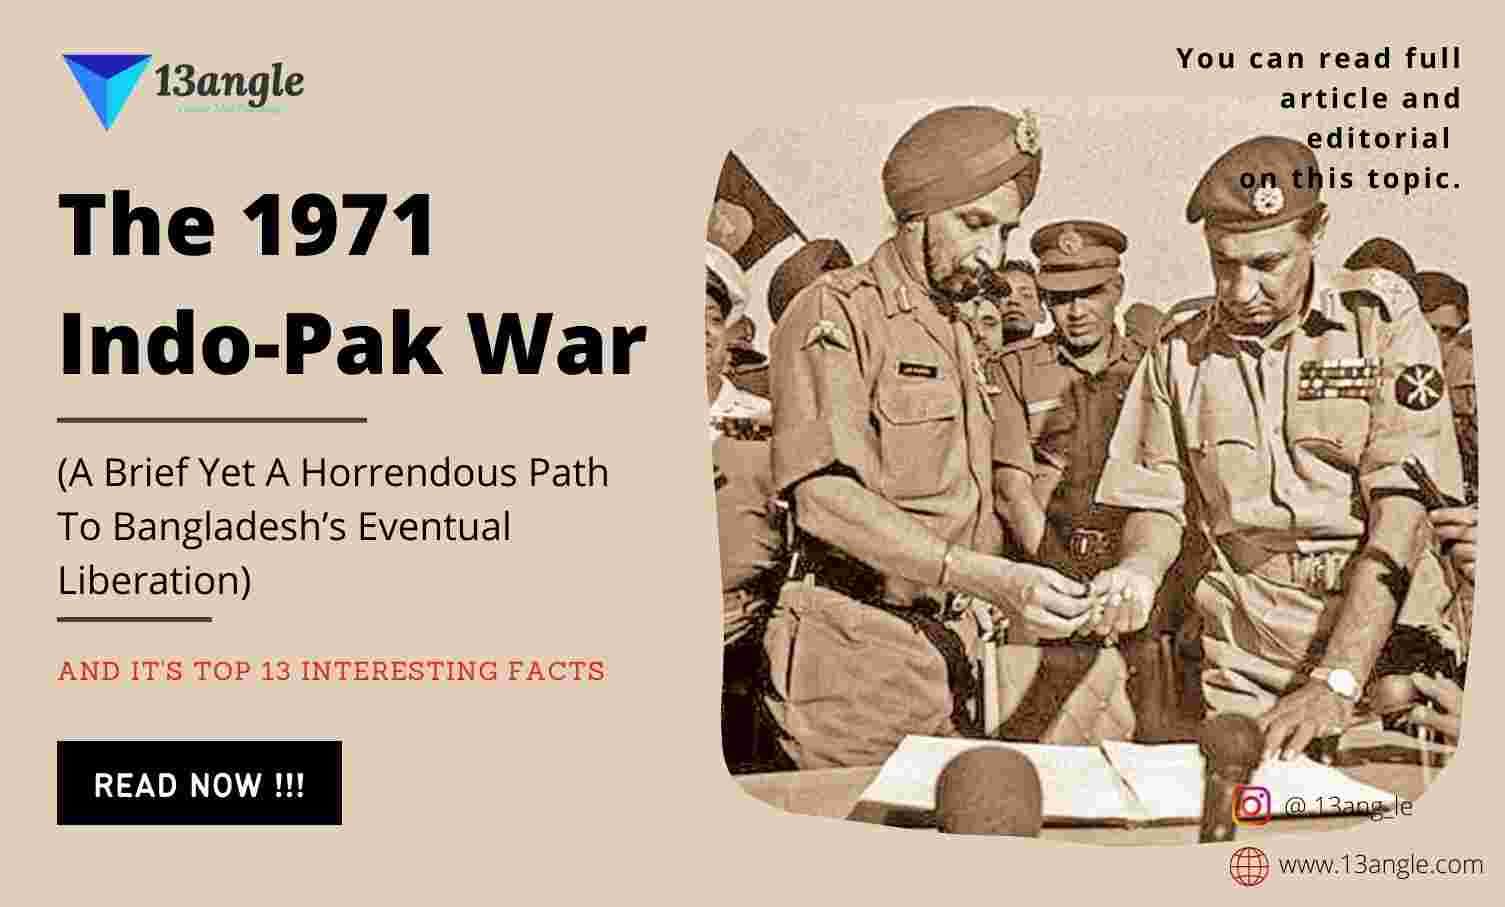 The 1971 Indo-Pak War And It's Top 13 Interesting Facts- 13angle.com